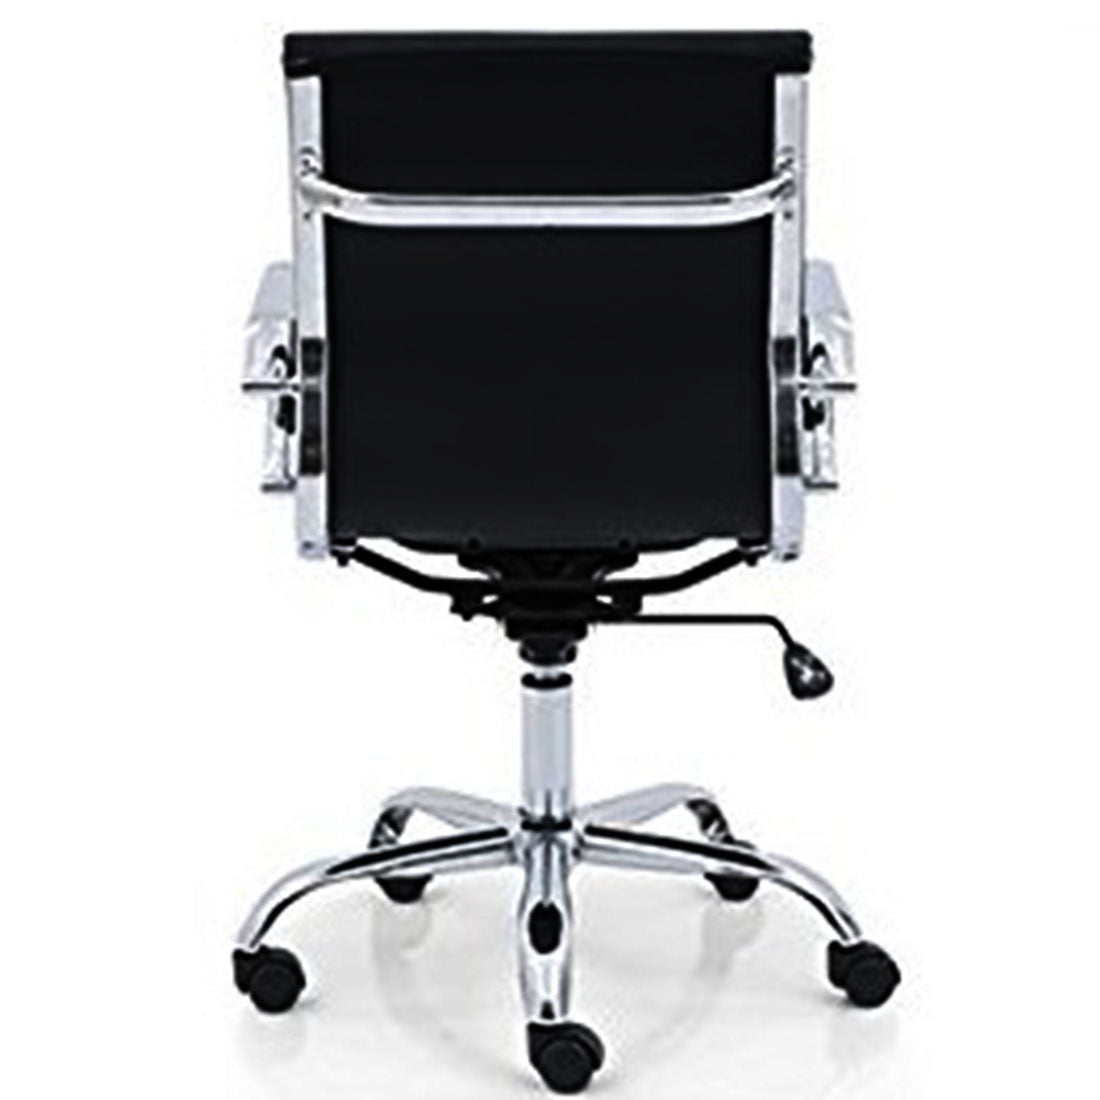 Revolving Chair with Back Support (Black)